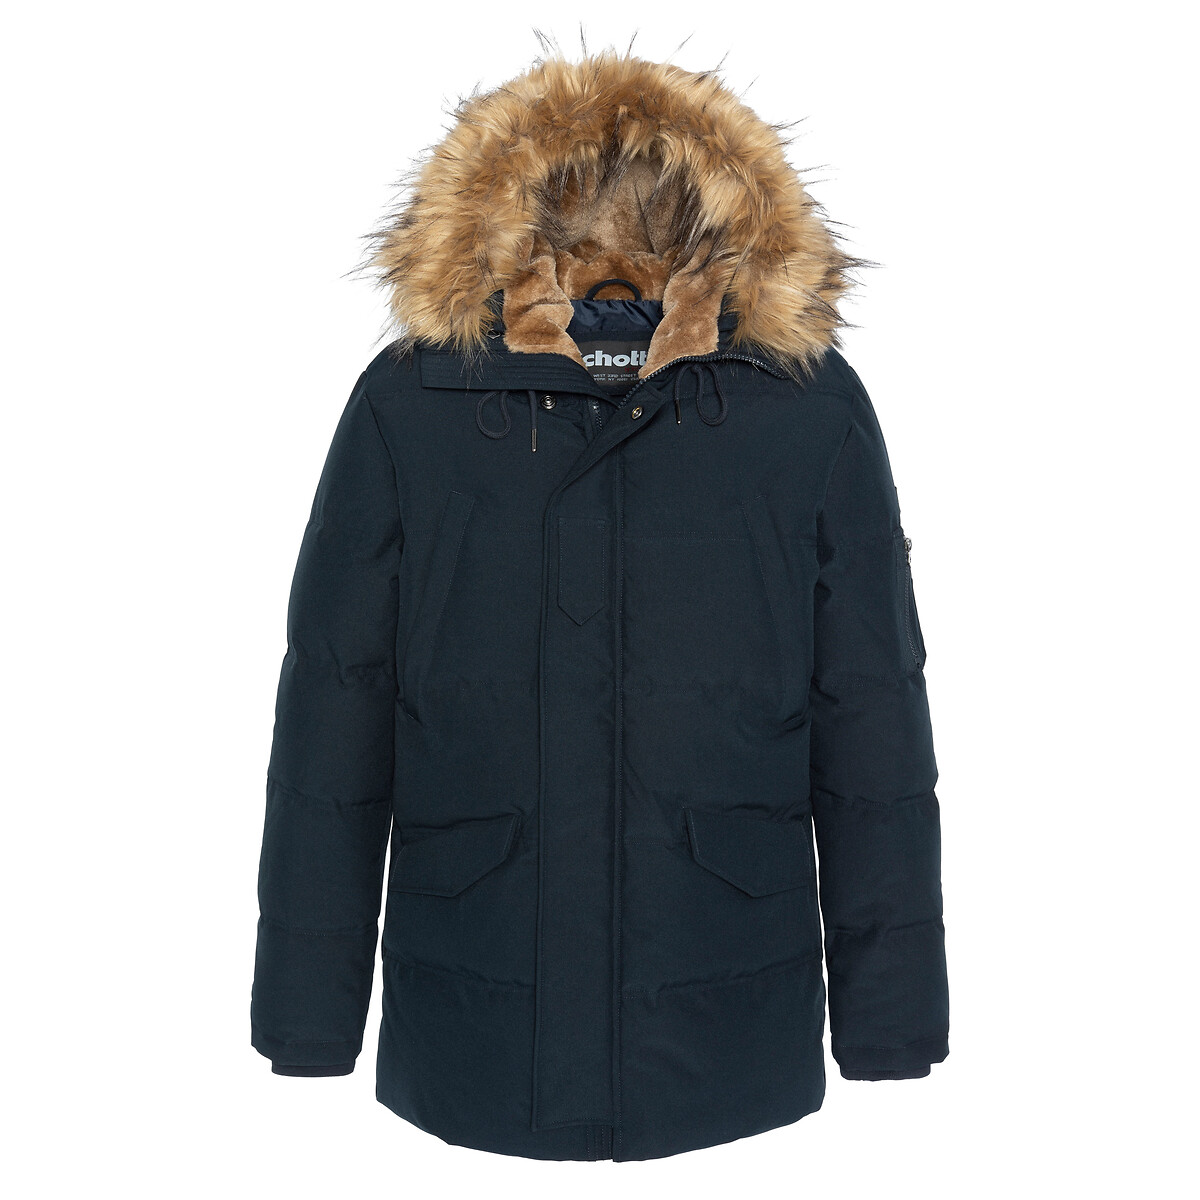 Hooded Winter Padded Jacket with Faux Fur Trim, Mid-Length